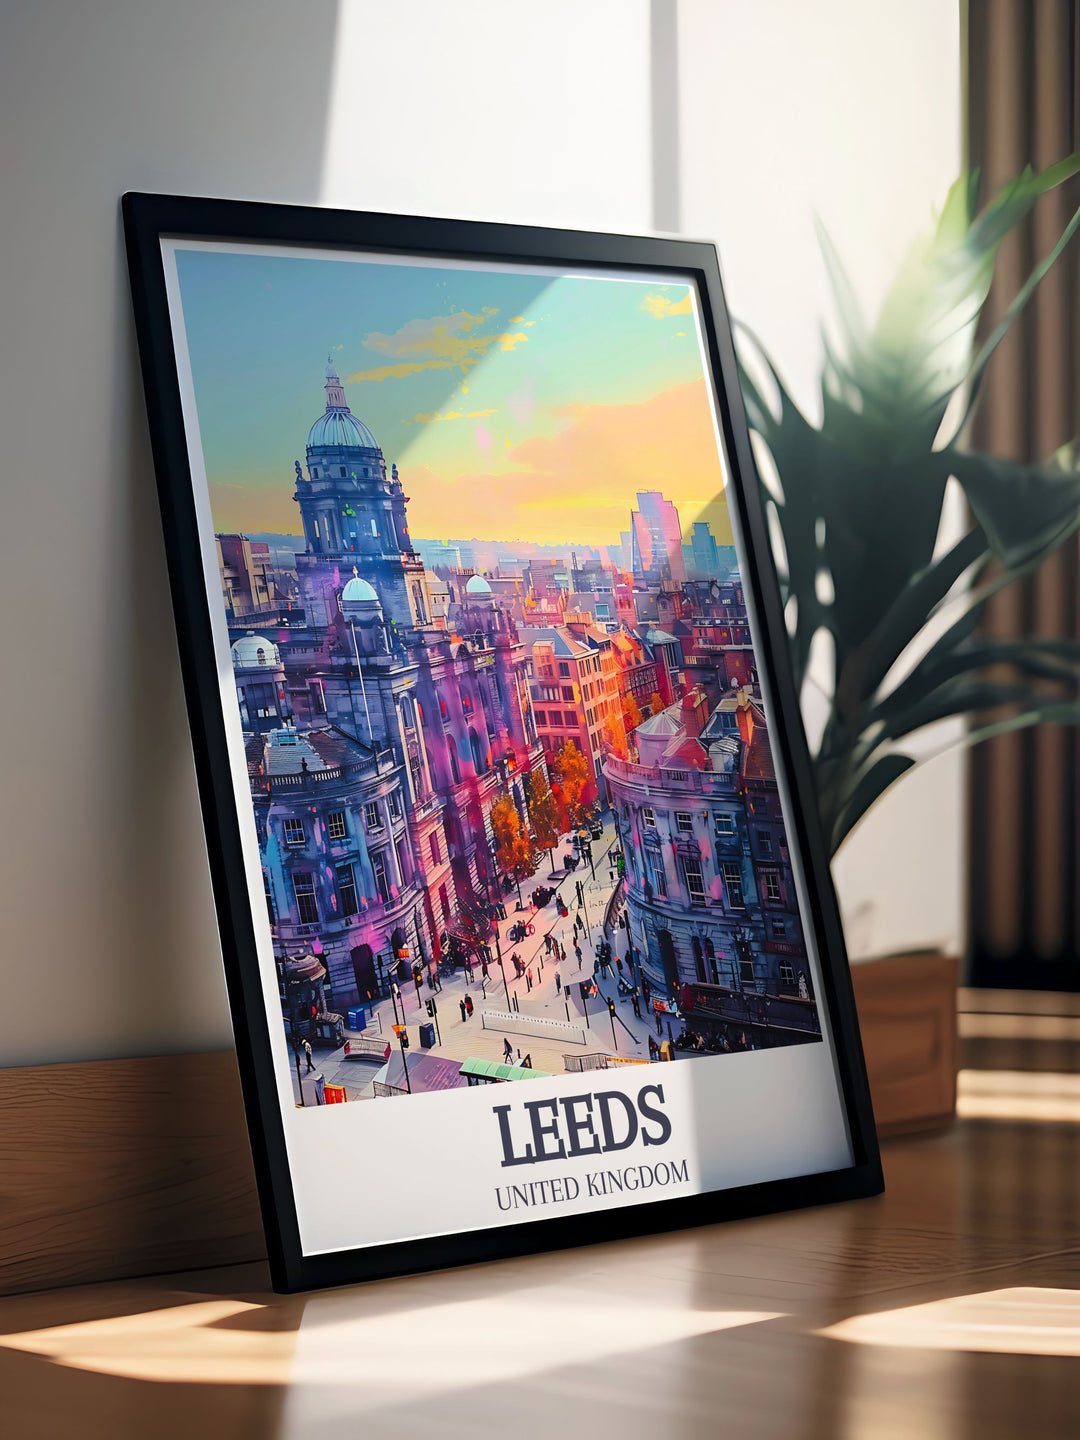 Stunning Leeds Corn Exchange and Briggate High Street wall decor showcasing the iconic architecture and lively atmosphere of Leeds. This England travel poster makes an excellent England art gift for friends and family.